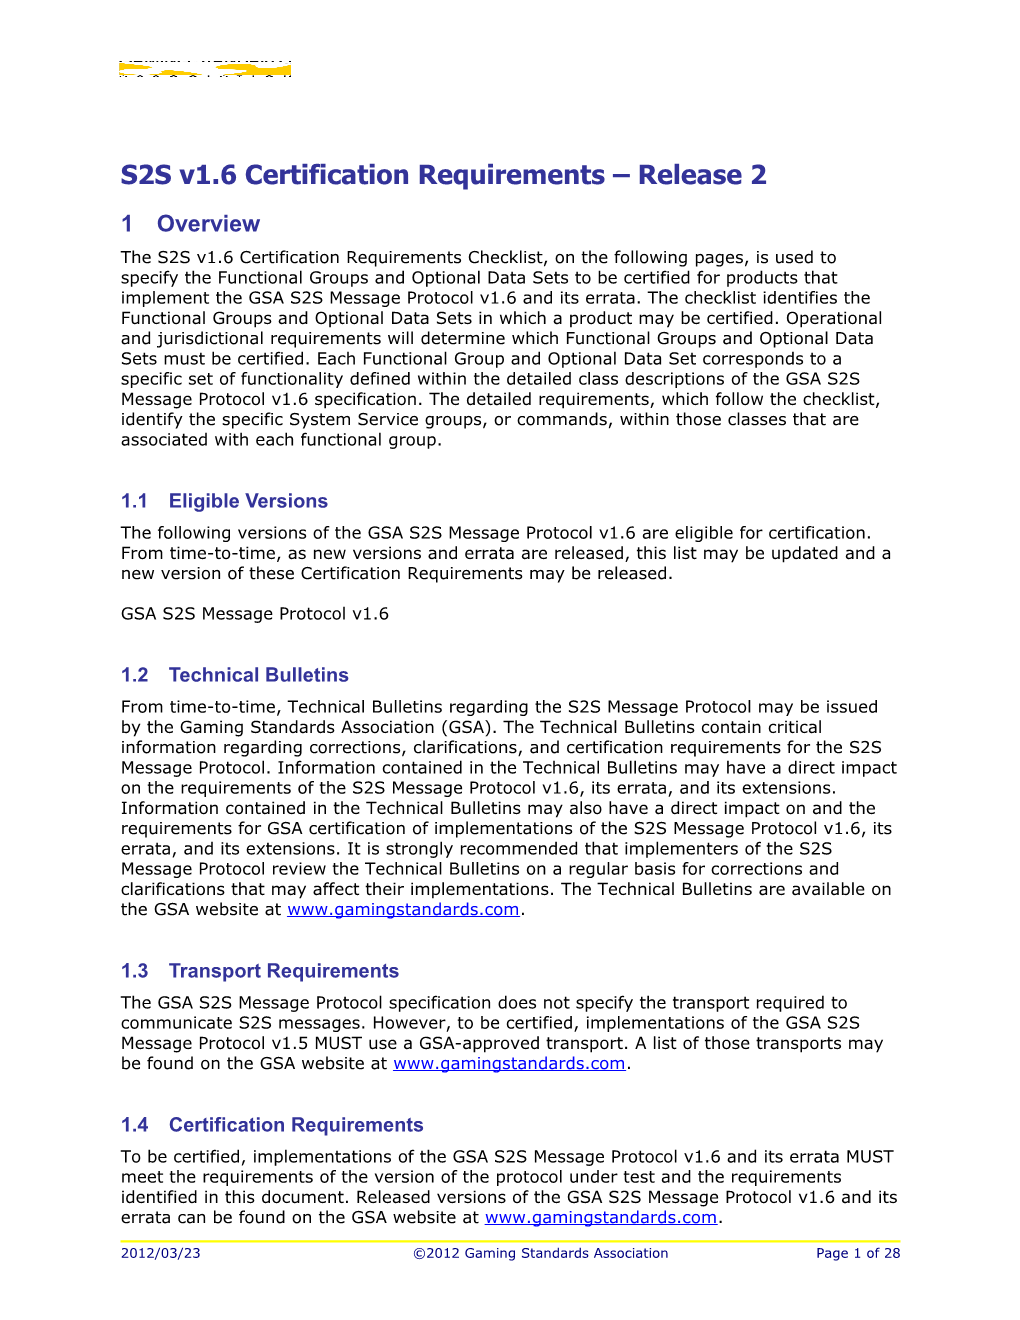 S2S V1.6 Certification Requirements Release 2